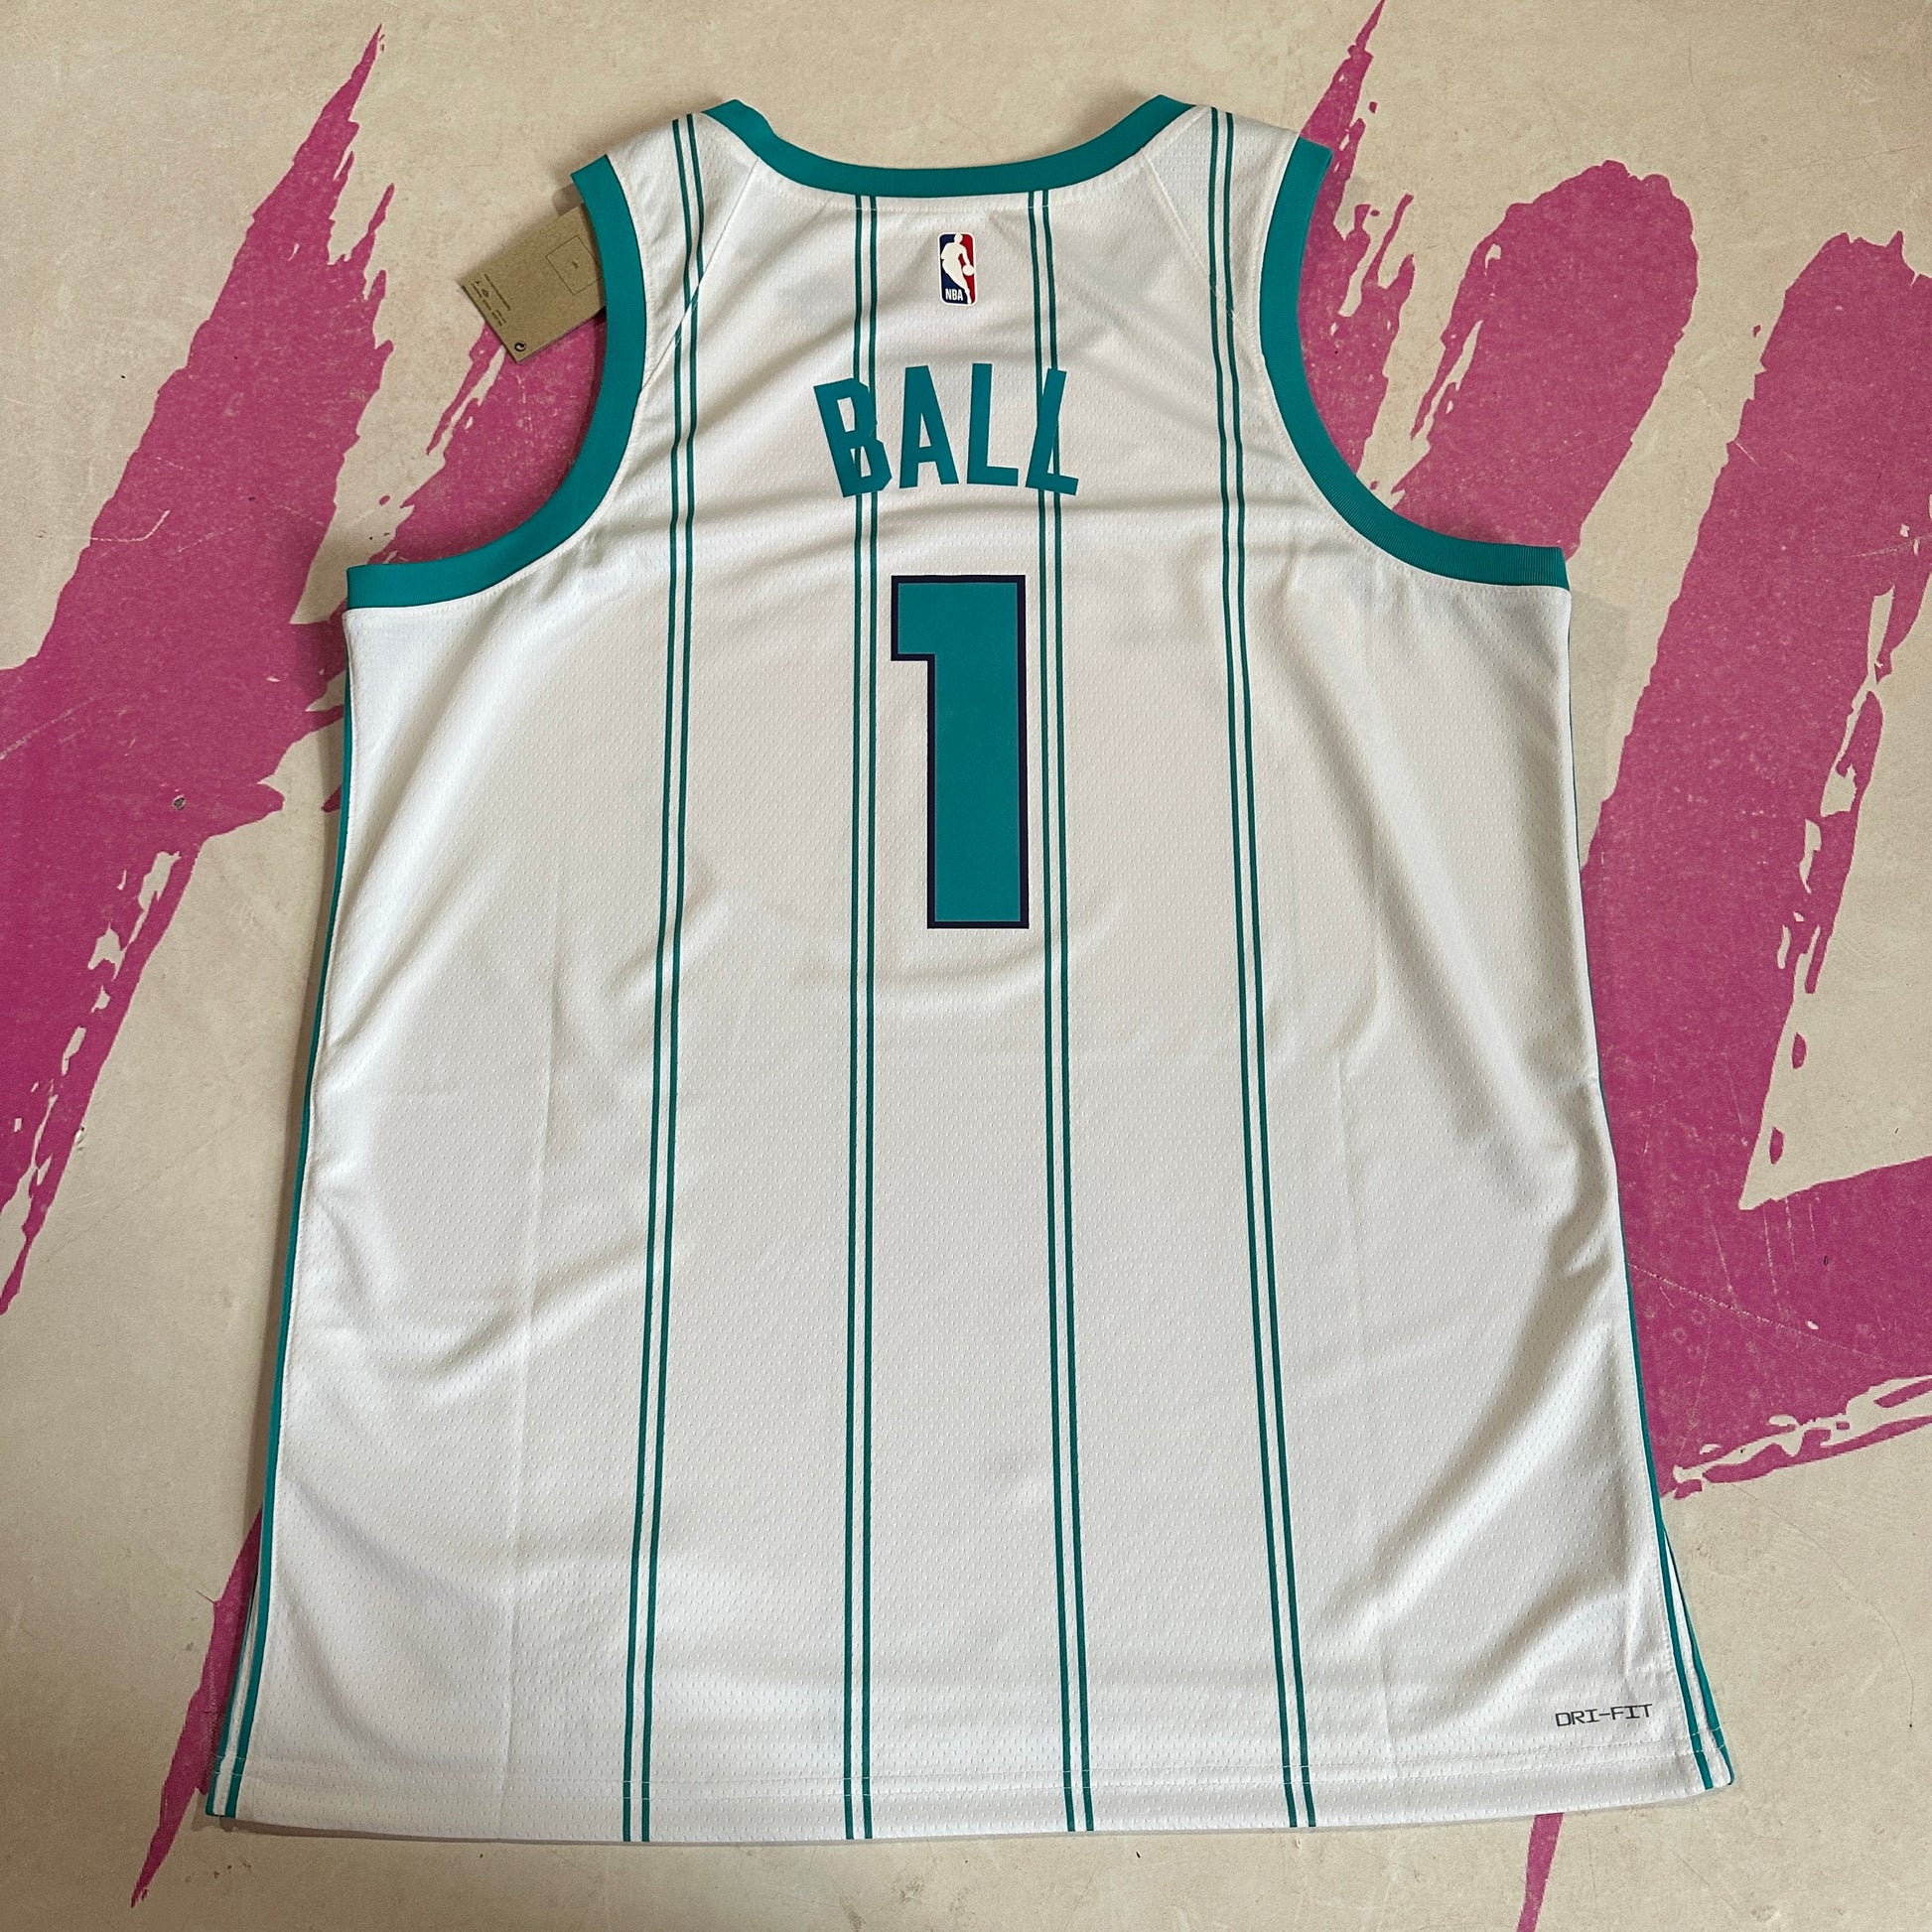 LaMelo Ball - Charlotte Hornets - Game-Worn City Edition Jersey